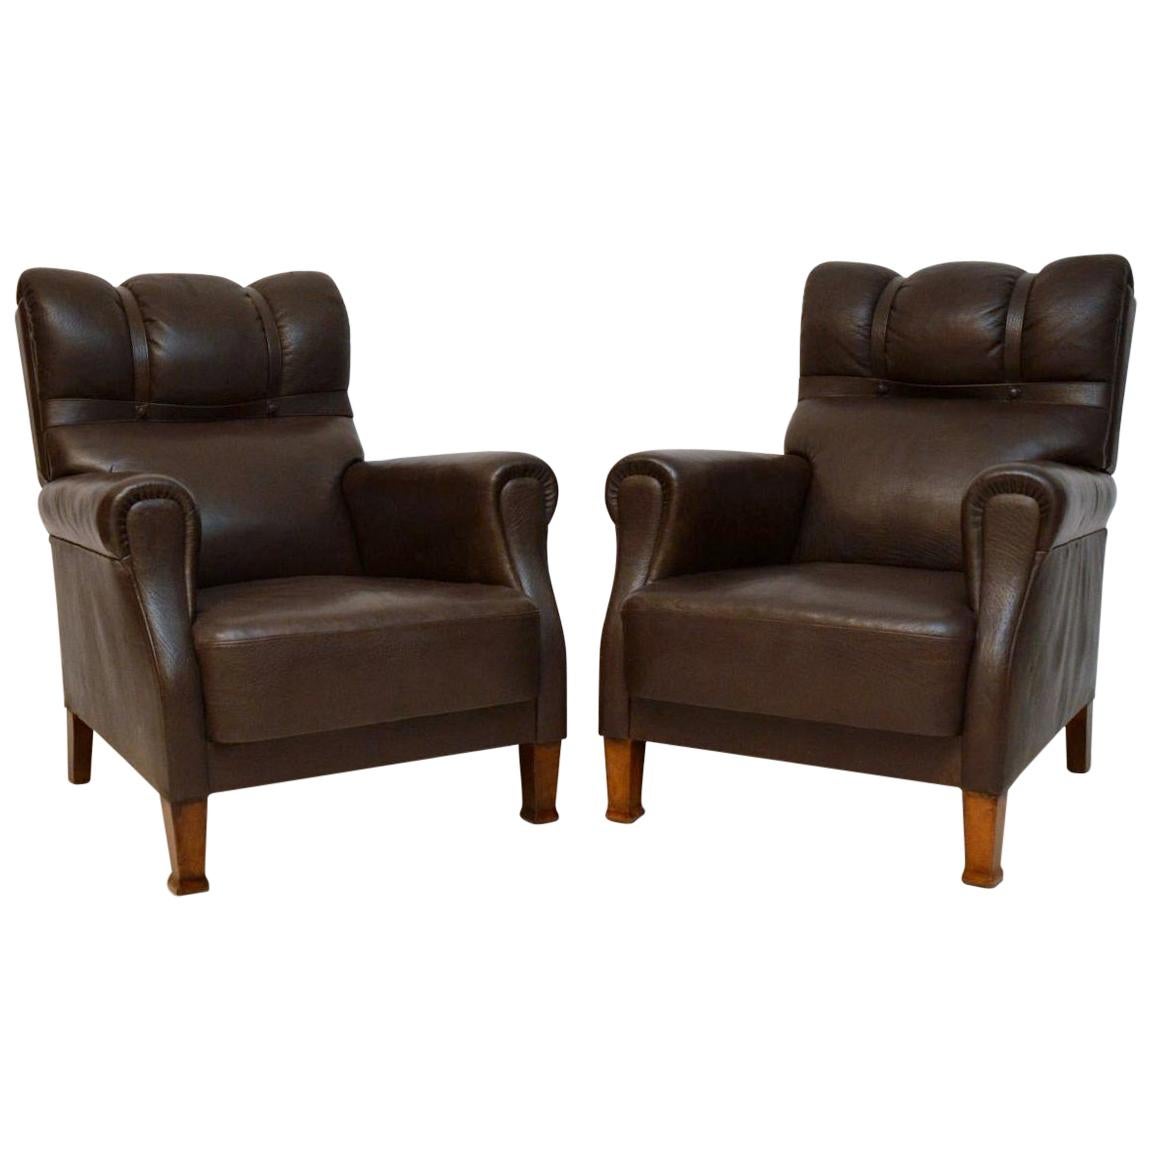 Pair of Antique Swedish Leather Armchairs